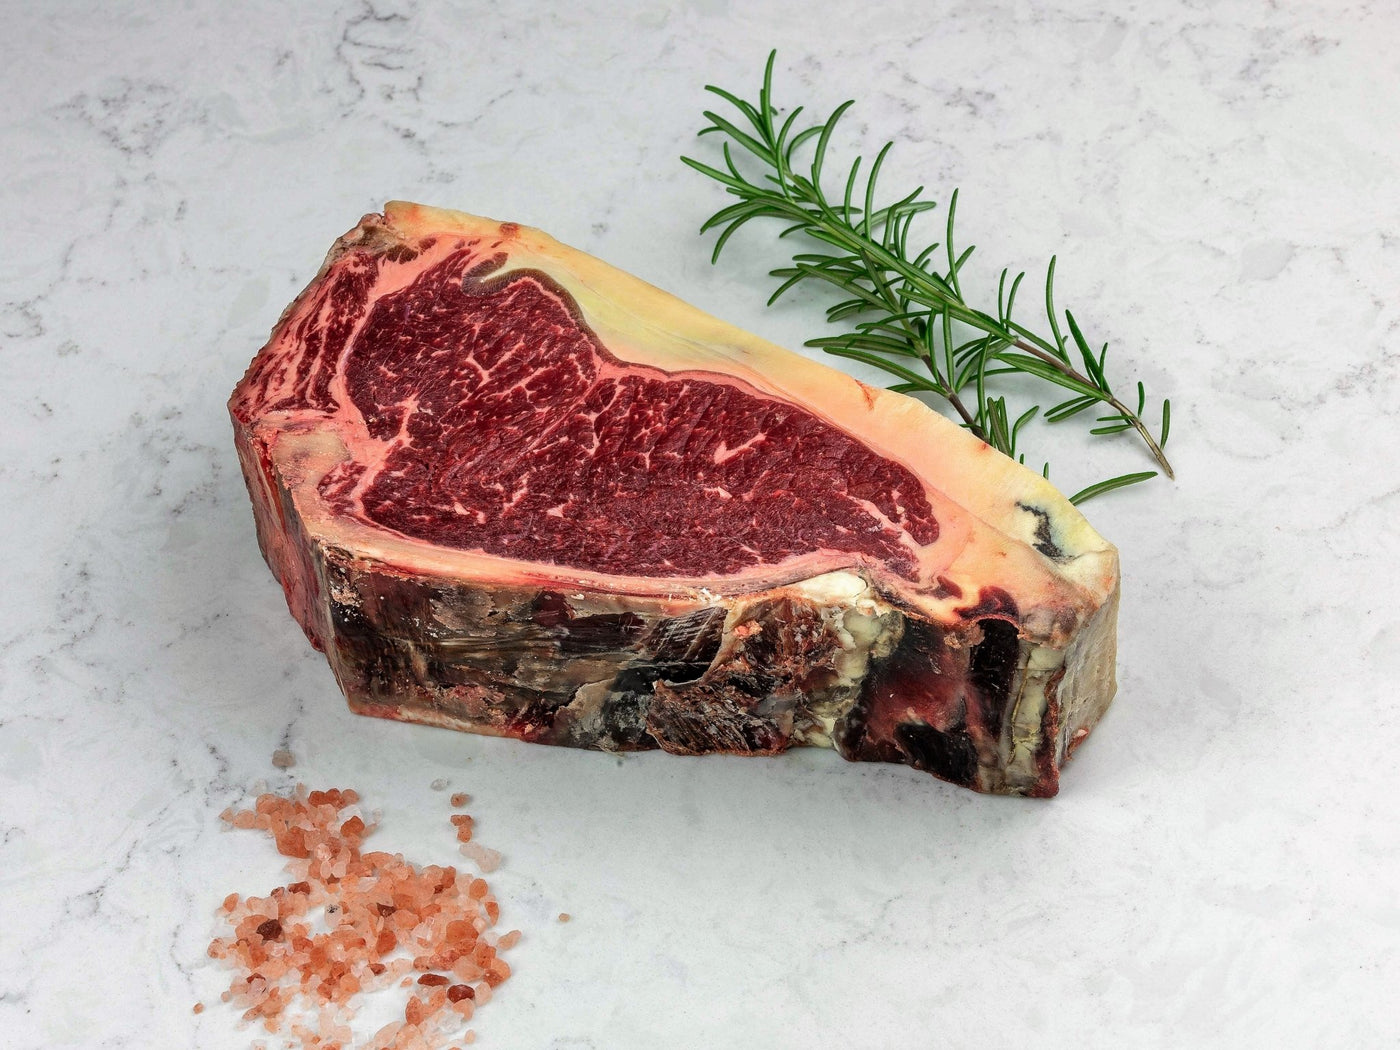 Dry-Aged Ex-Dairy Sirloin On The Bone - Beef - Thomas Joseph Butchery - Ethical Dry-Aged Meat The Best Steak UK Thomas Joseph Butchery